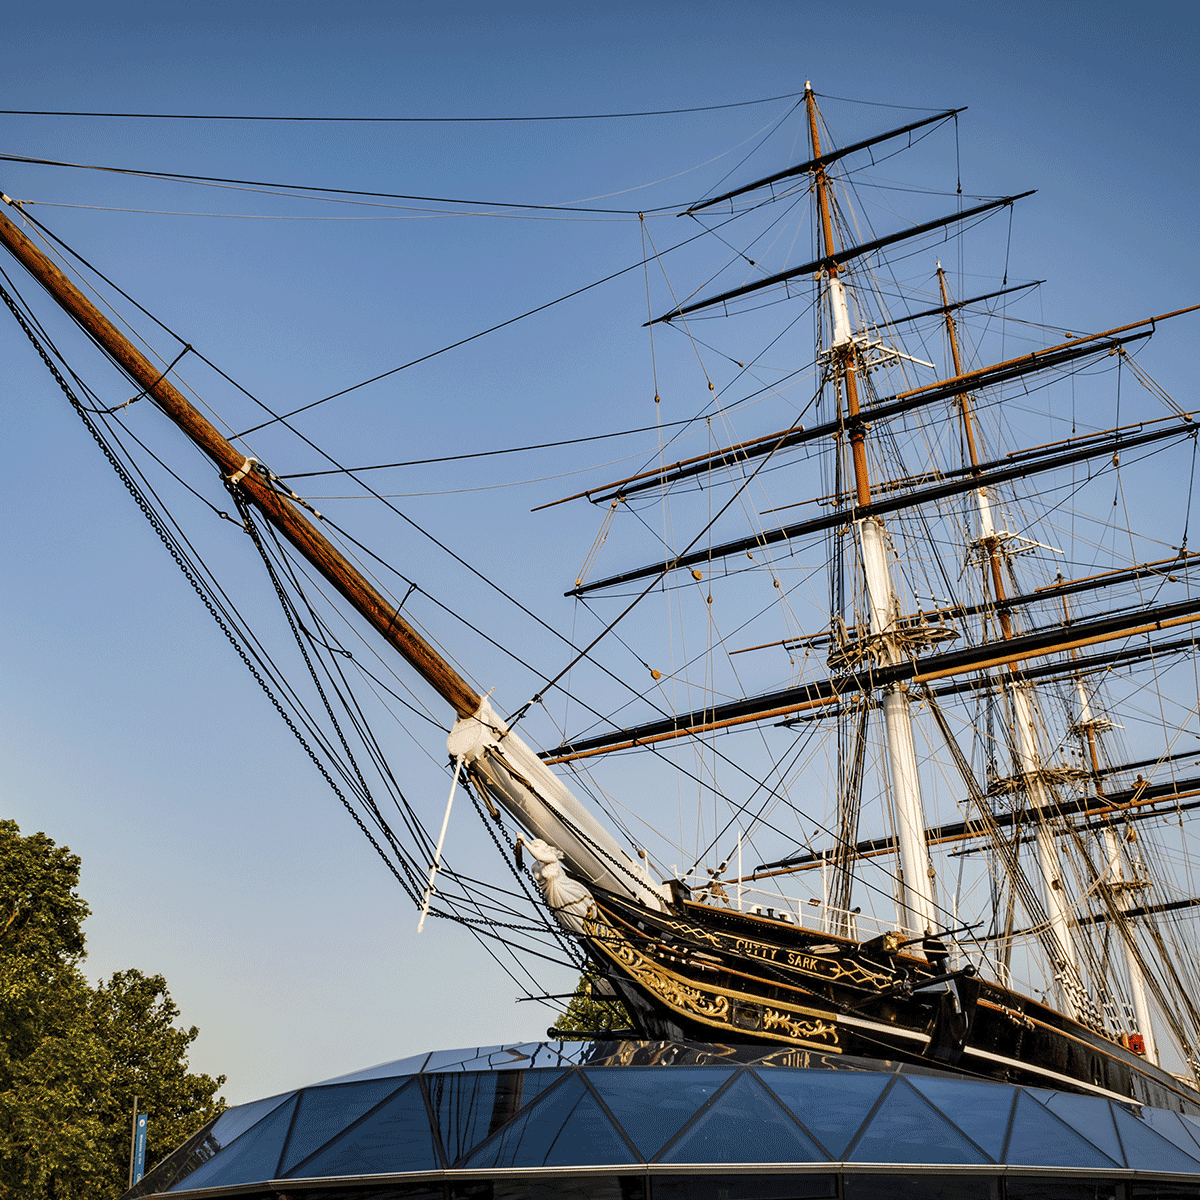 https://www.ntrltd.com/wp-content/uploads/2021/10/NTR-projects-cutty-sark-1.png